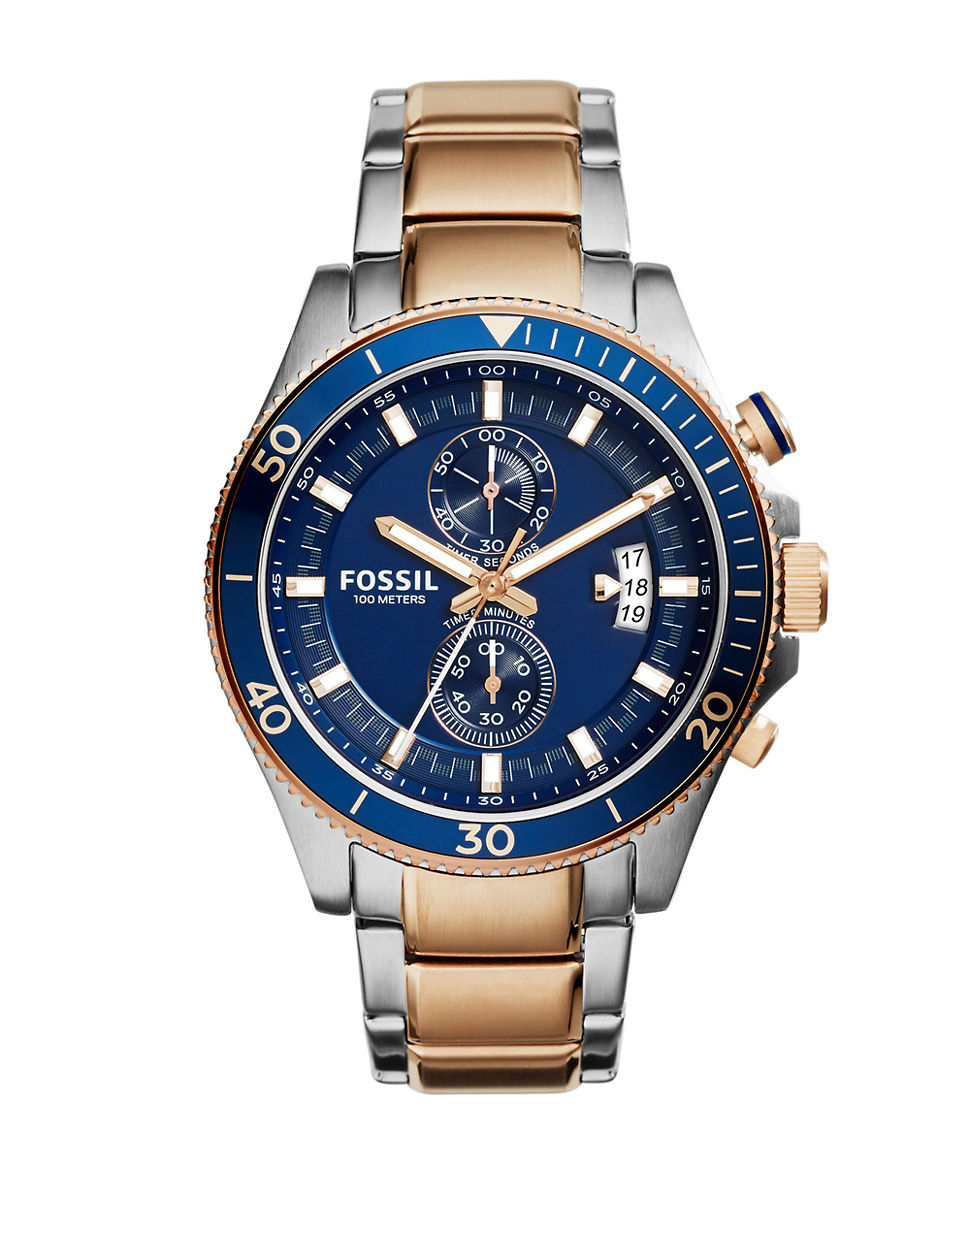 Fossil Two Tone Watch - www.inf-inet.com